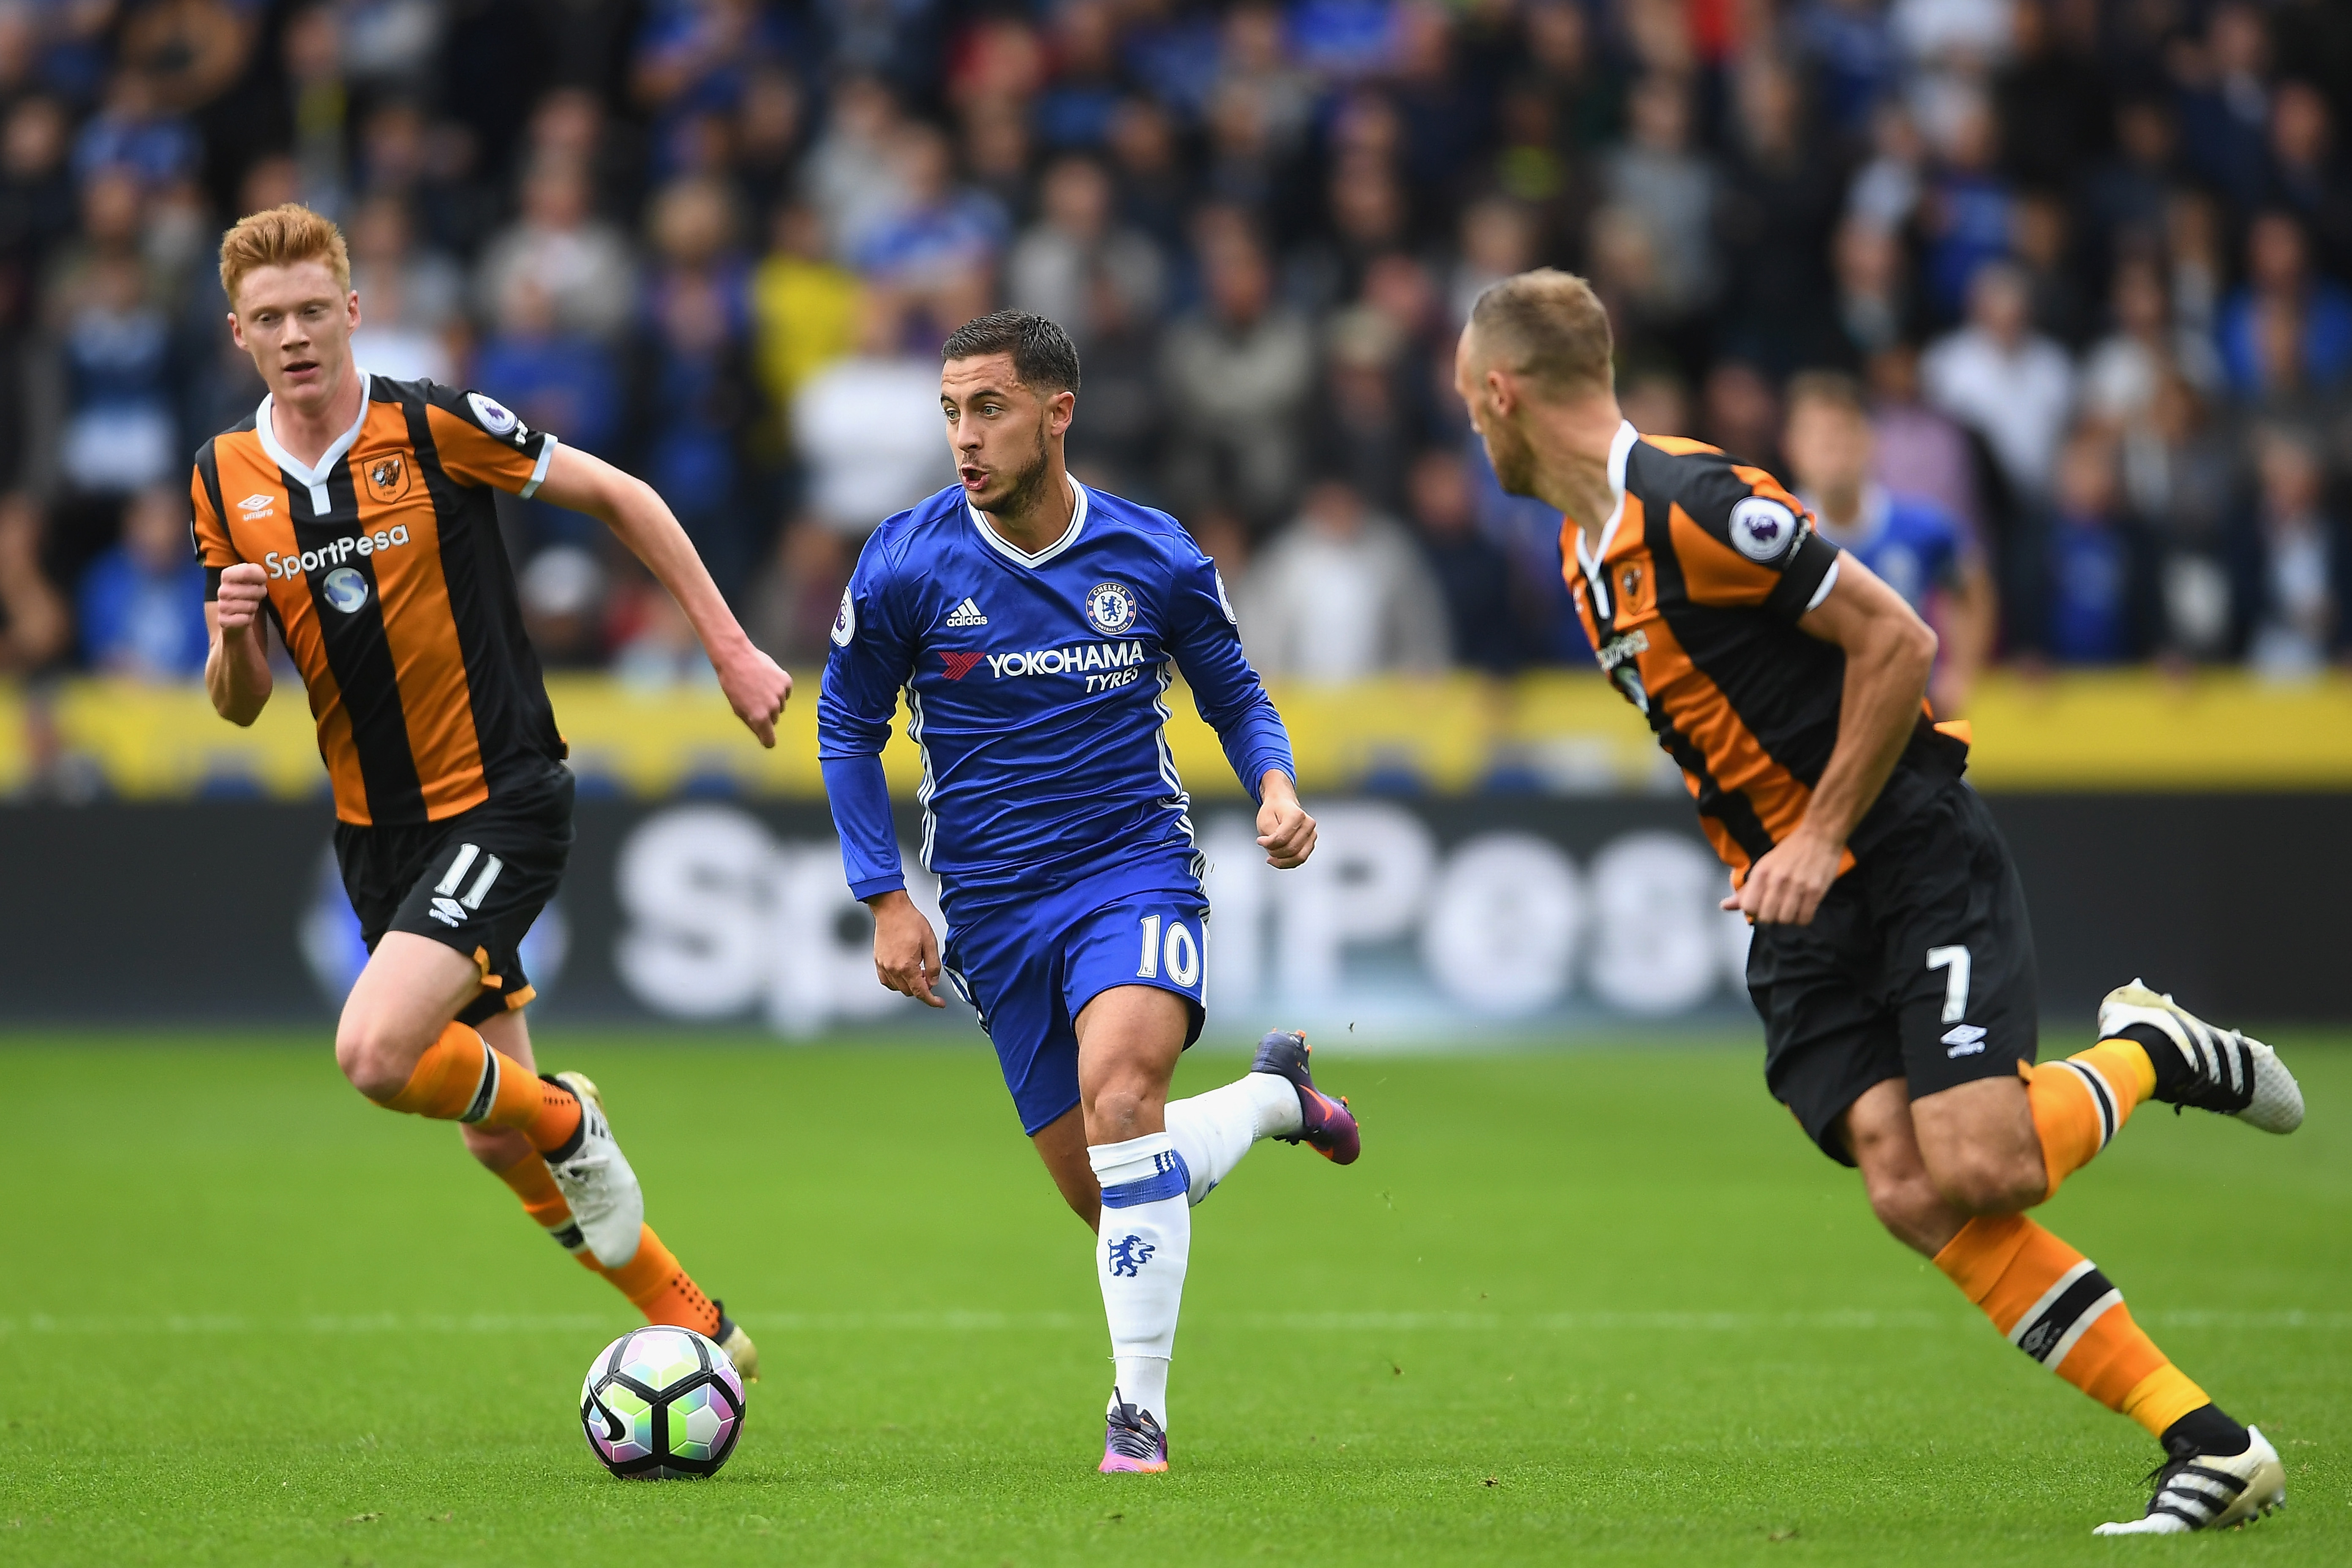 HULL, ENGLAND - OCTOBER 01: Eden Hazard of Chelsea takes the ball past David Meyler of Hull City (R) and Sam Clucas of Hull City (L) during the Premier League match between Hull City and Chelsea at KCOM Stadium on October 1, 2016 in Hull, England.  (Photo by Laurence Griffiths/Getty Images)